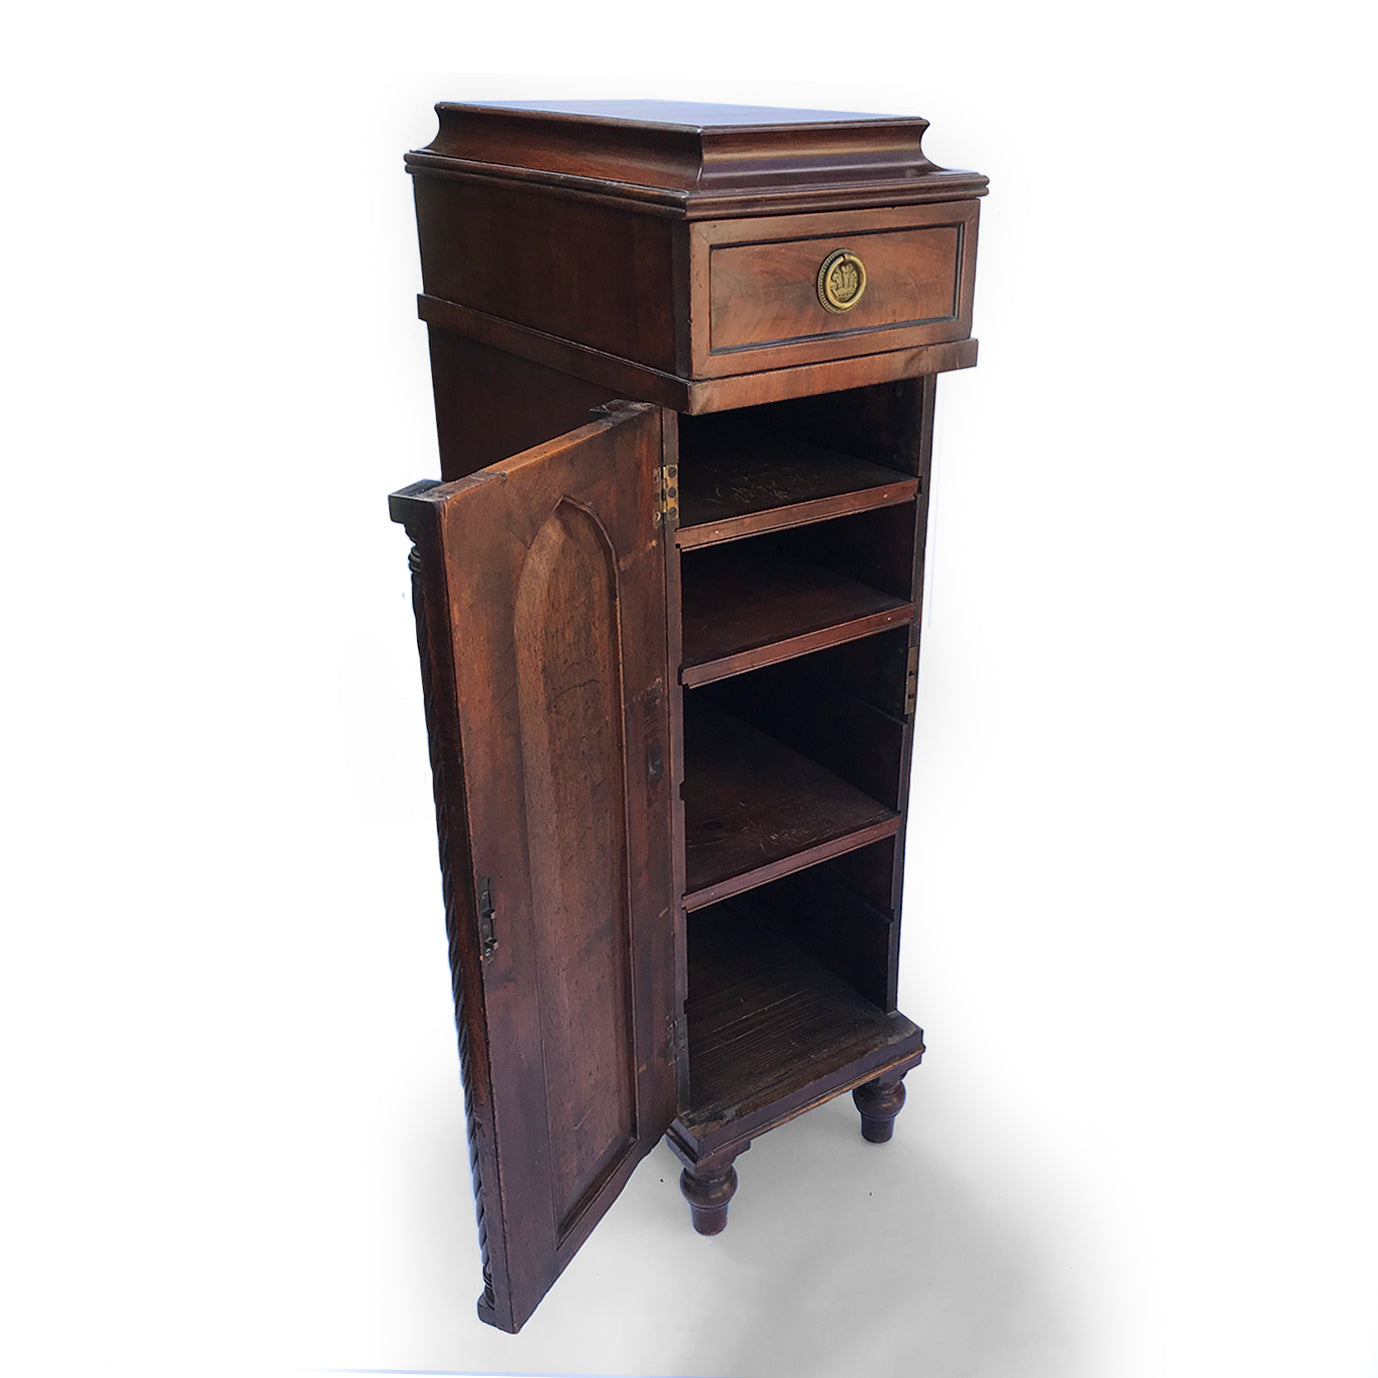 An excellent pair of Regency cabinets with lovely detailing. Curved shaped tops hold drawers with round brass handles with embossed Prince of Wales feather emblems - SHOP NOW - www.intovintage.co.uk